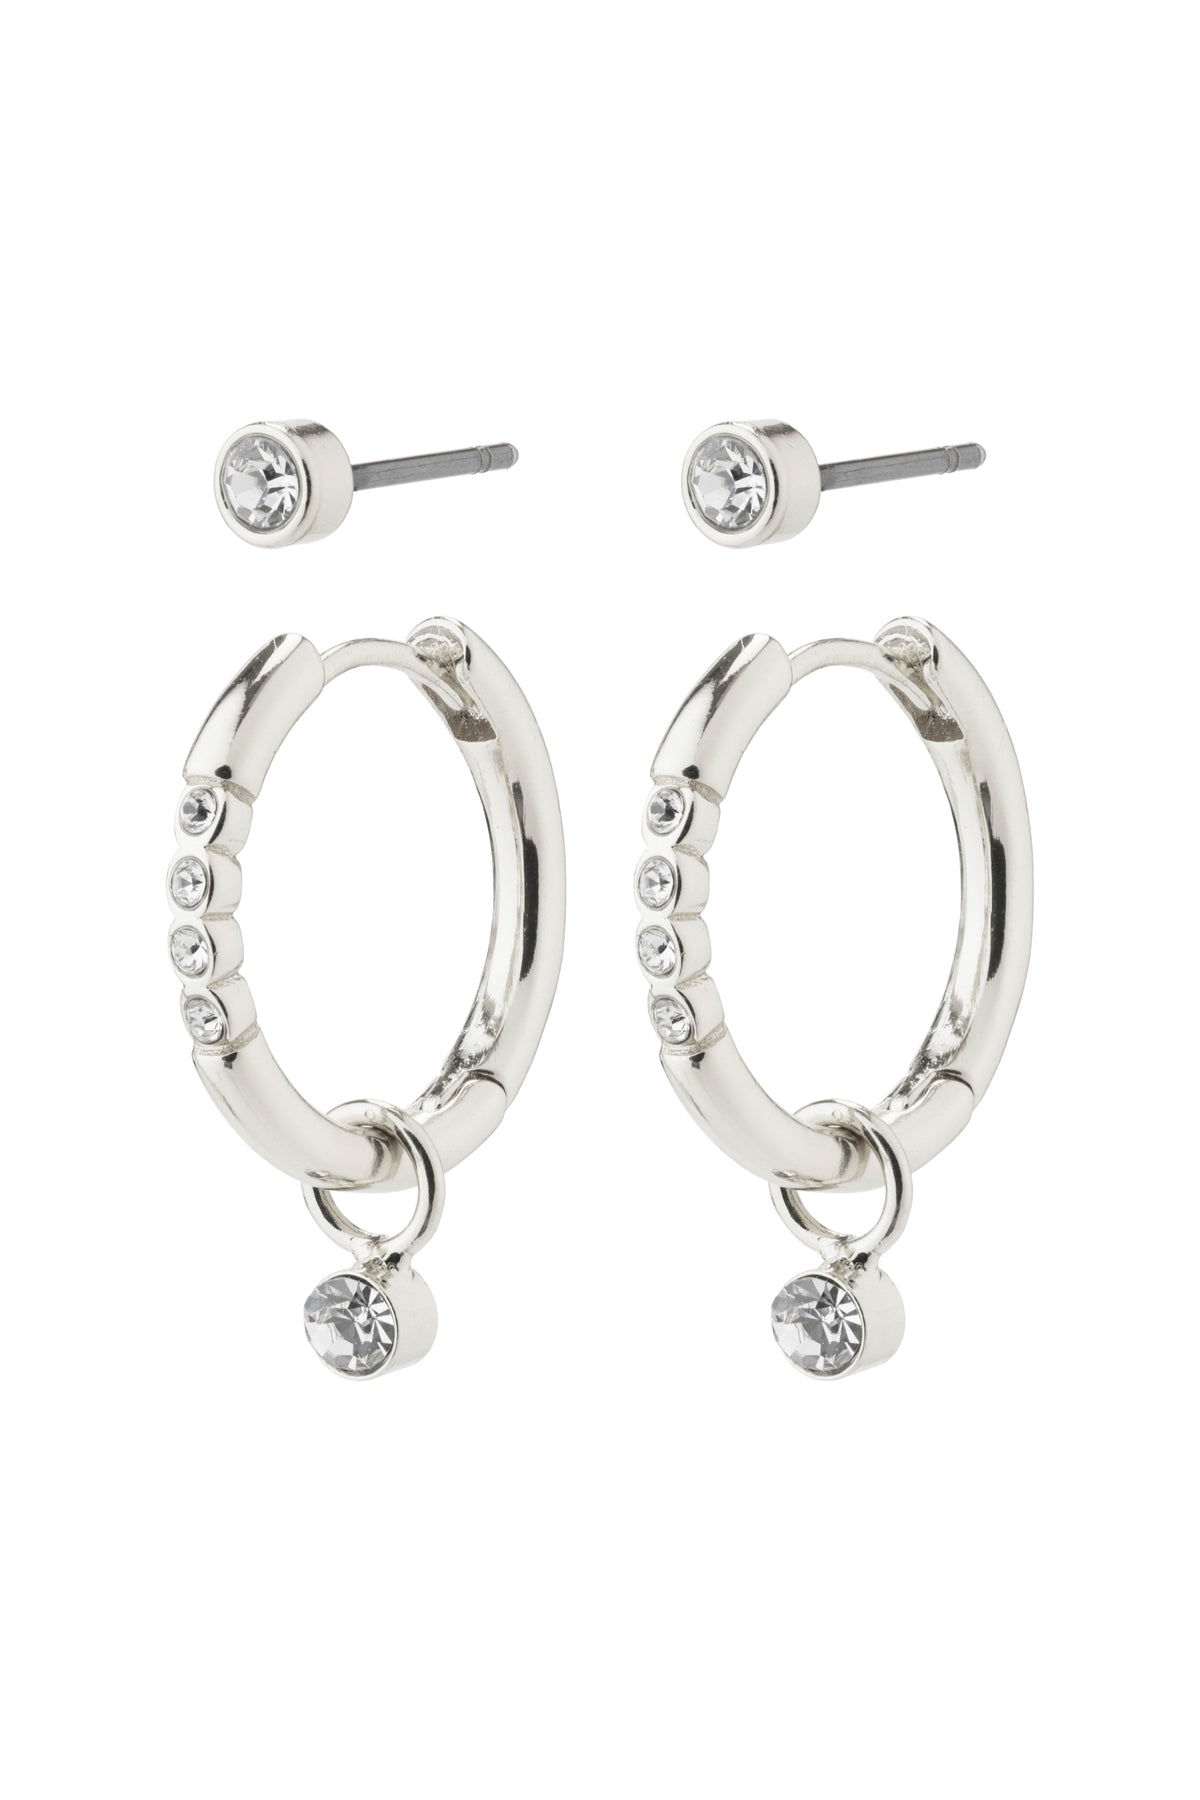 Elna Recycled Crystal Earrings 2 in 1 Set - Silver Plated